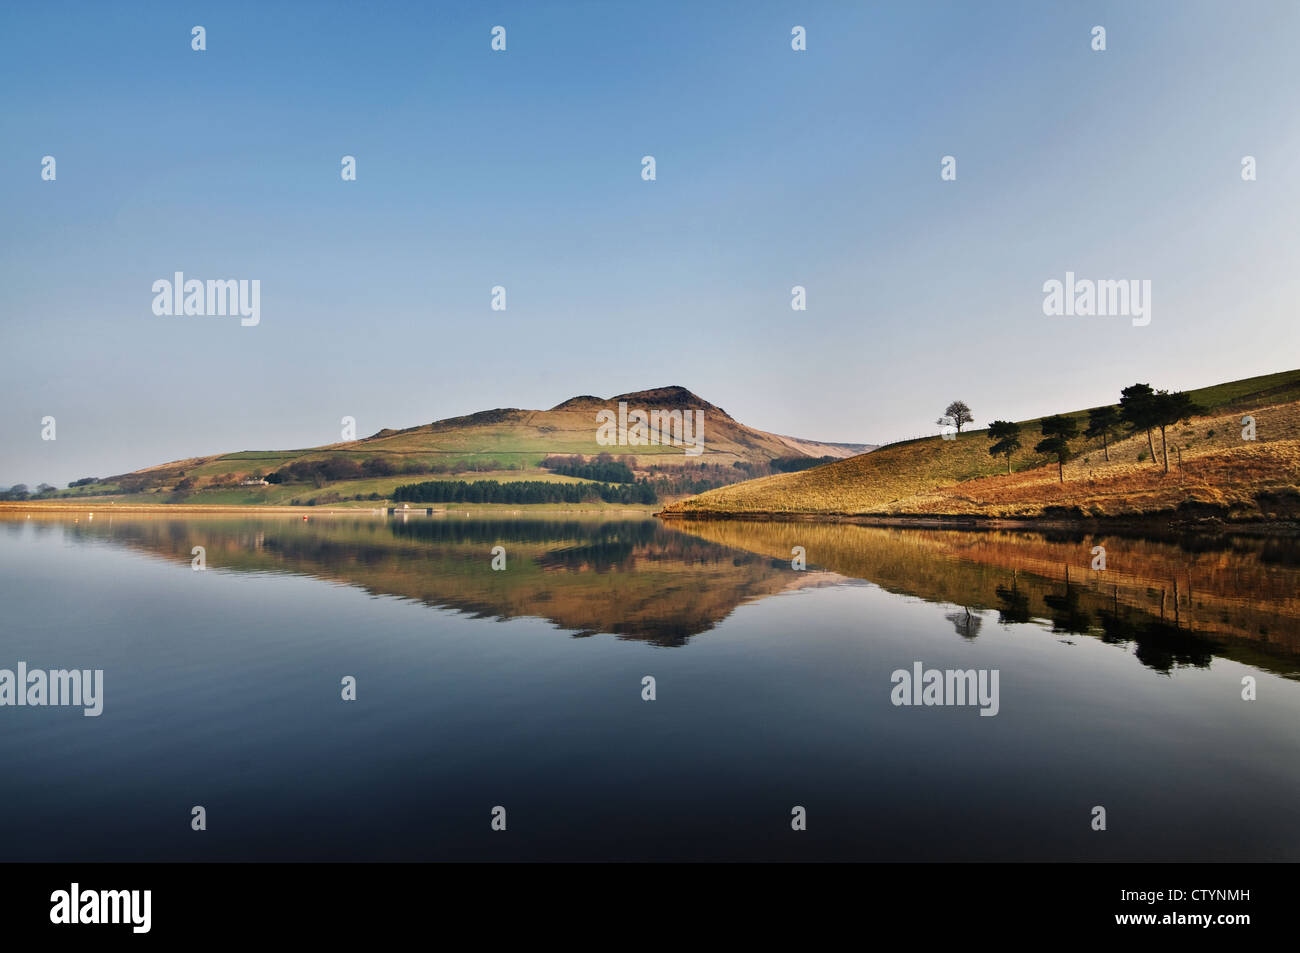 Reflection of hill at Dovestone Reservoir, Peak District, England Stock Photo